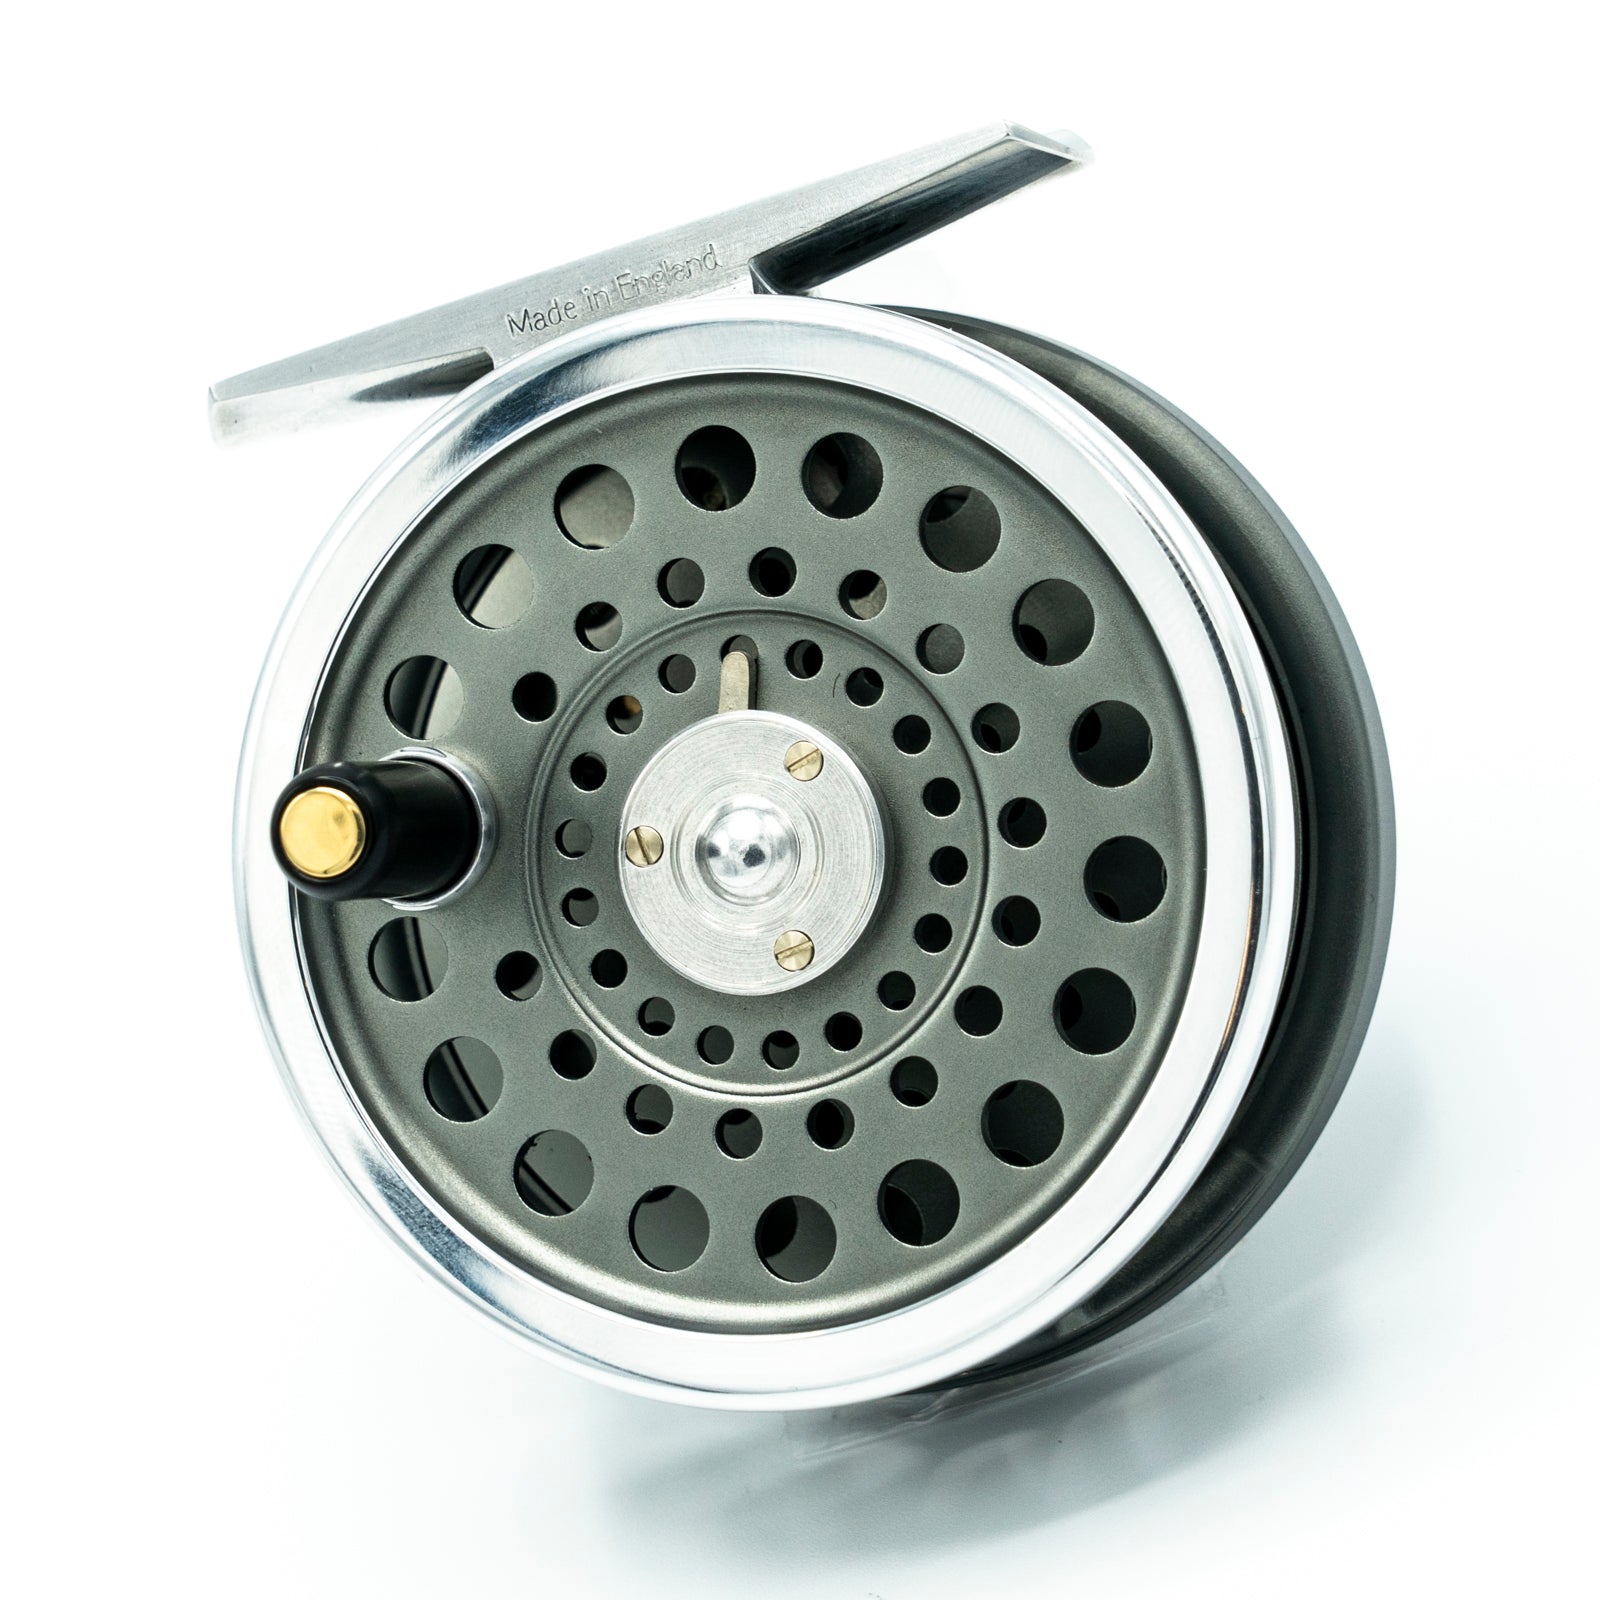 HARDY MARQUIS LWT 2/3 FLY REEL - FREE $80 LINE! - NEW